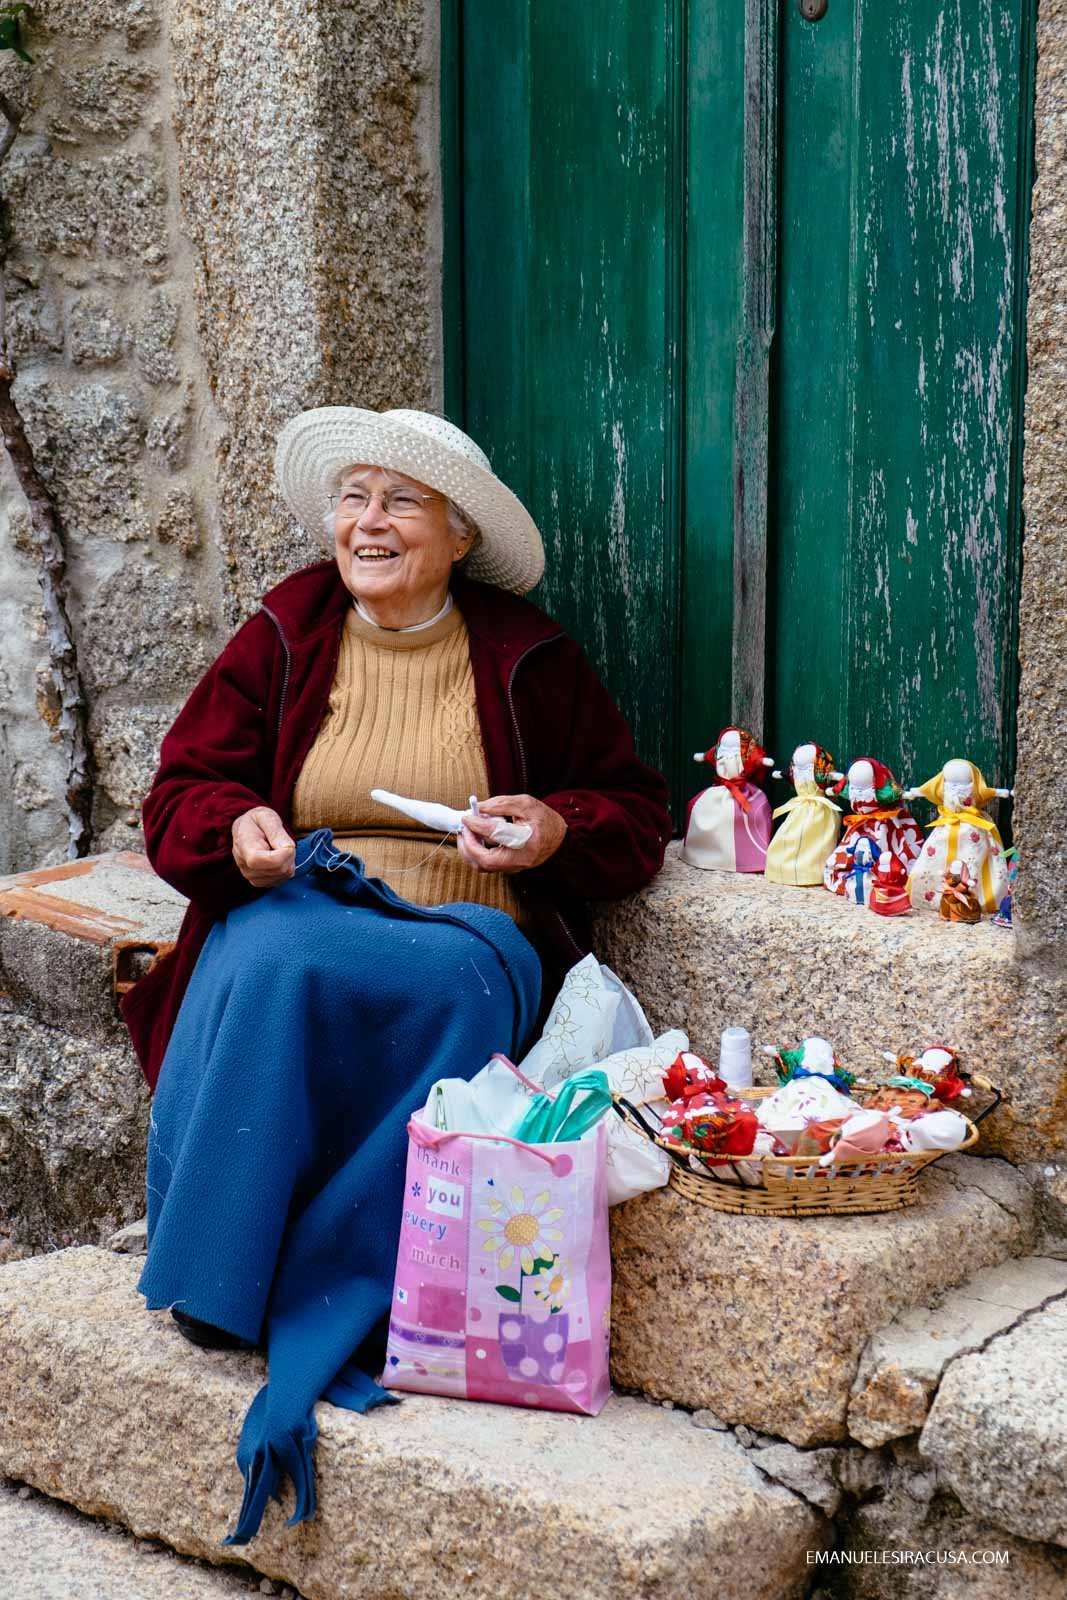 A local elderly lady selling dolls and other hand-made products in the streets of Monsanto, 2016